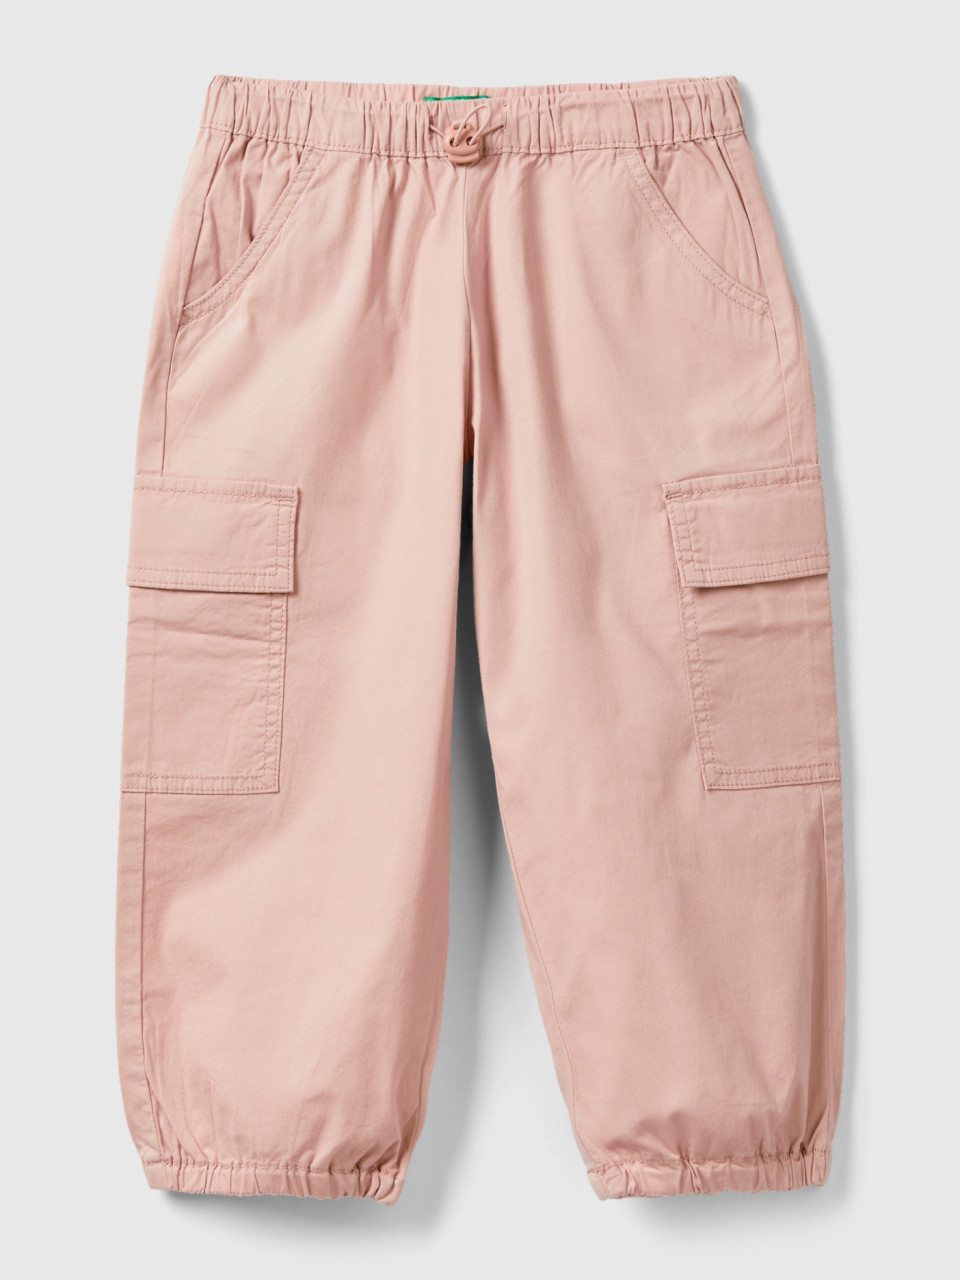 Benetton, Stretch Cotton Cargo Trousers, Pink, Kids